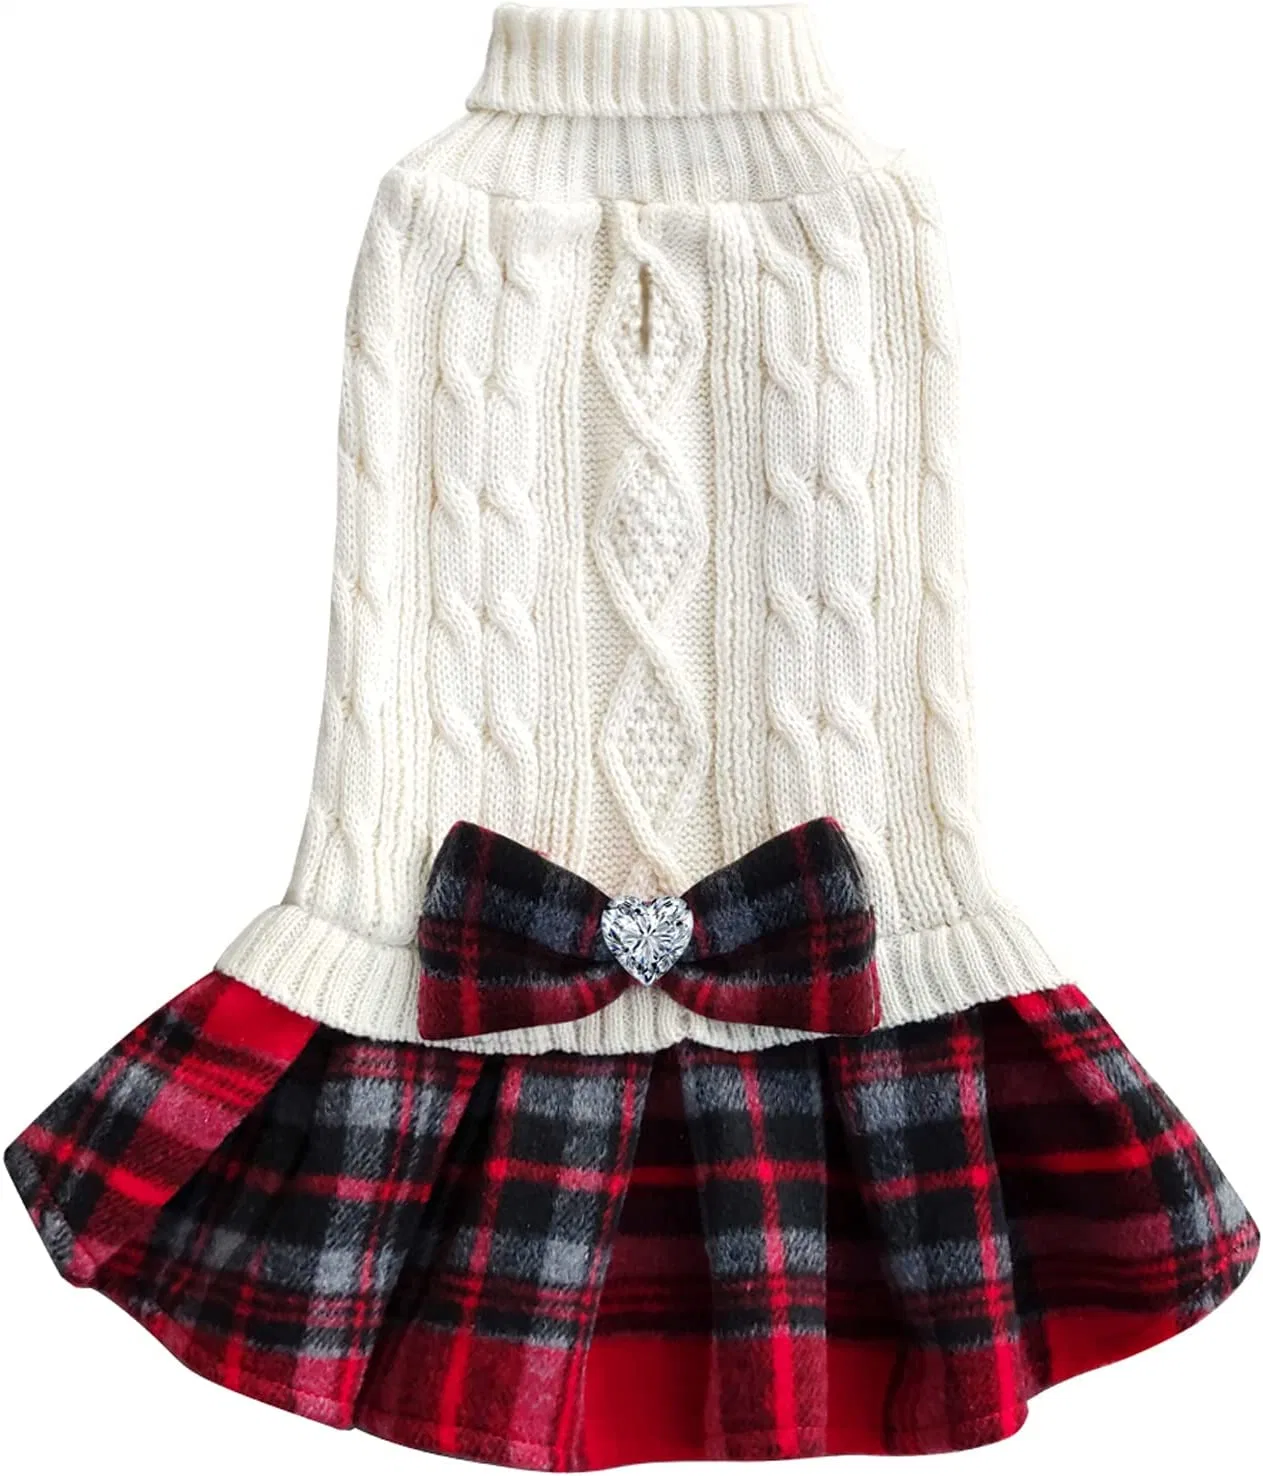 Knitted Pet Clothes Dog Sweater Dog Coat with Plaid Trims